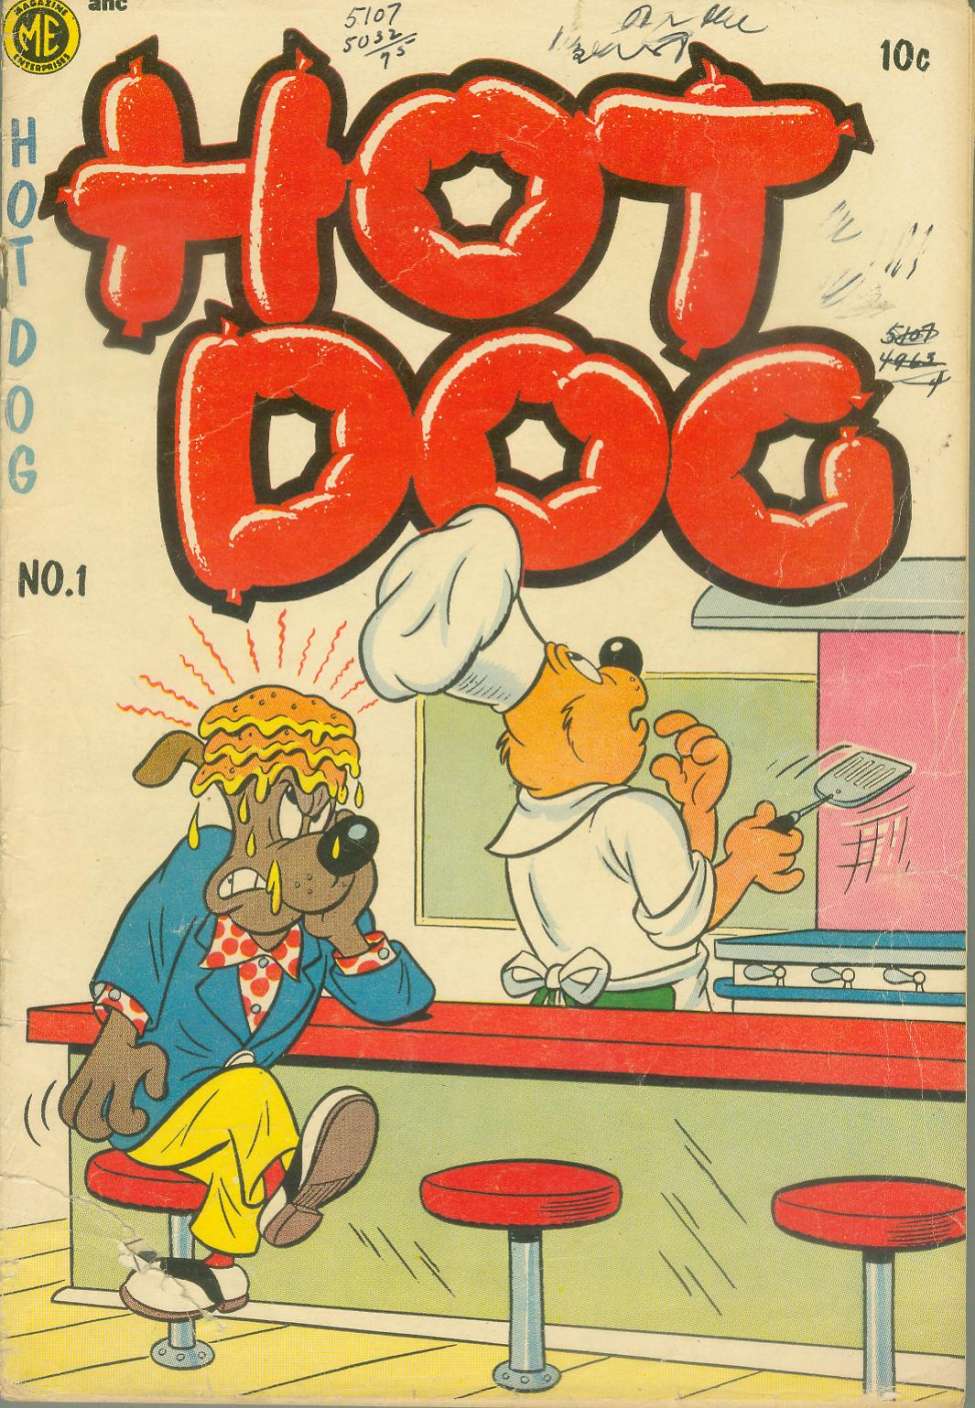 Book Cover For Hot Dog 1 (A-1 107)